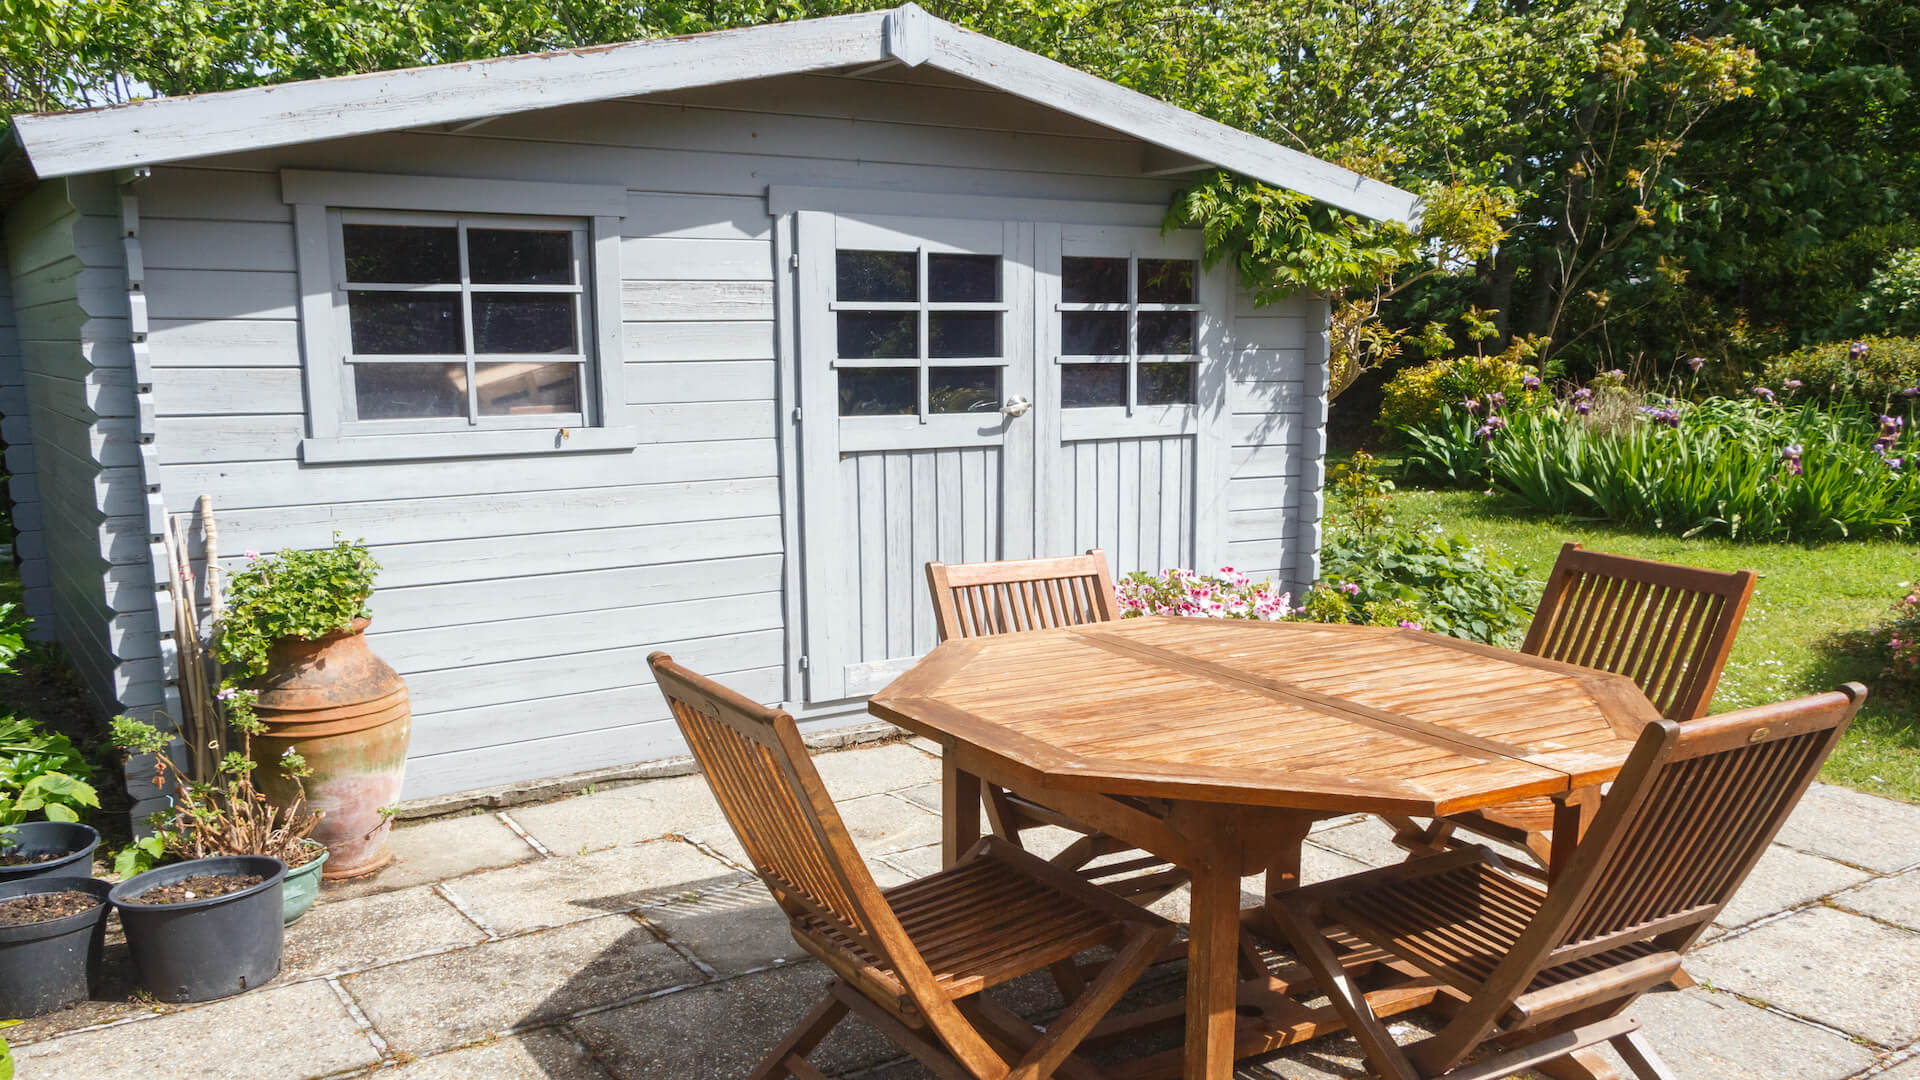 Top Tips On How To Make The Most Out Of Your Garden Shed - Build Magazine